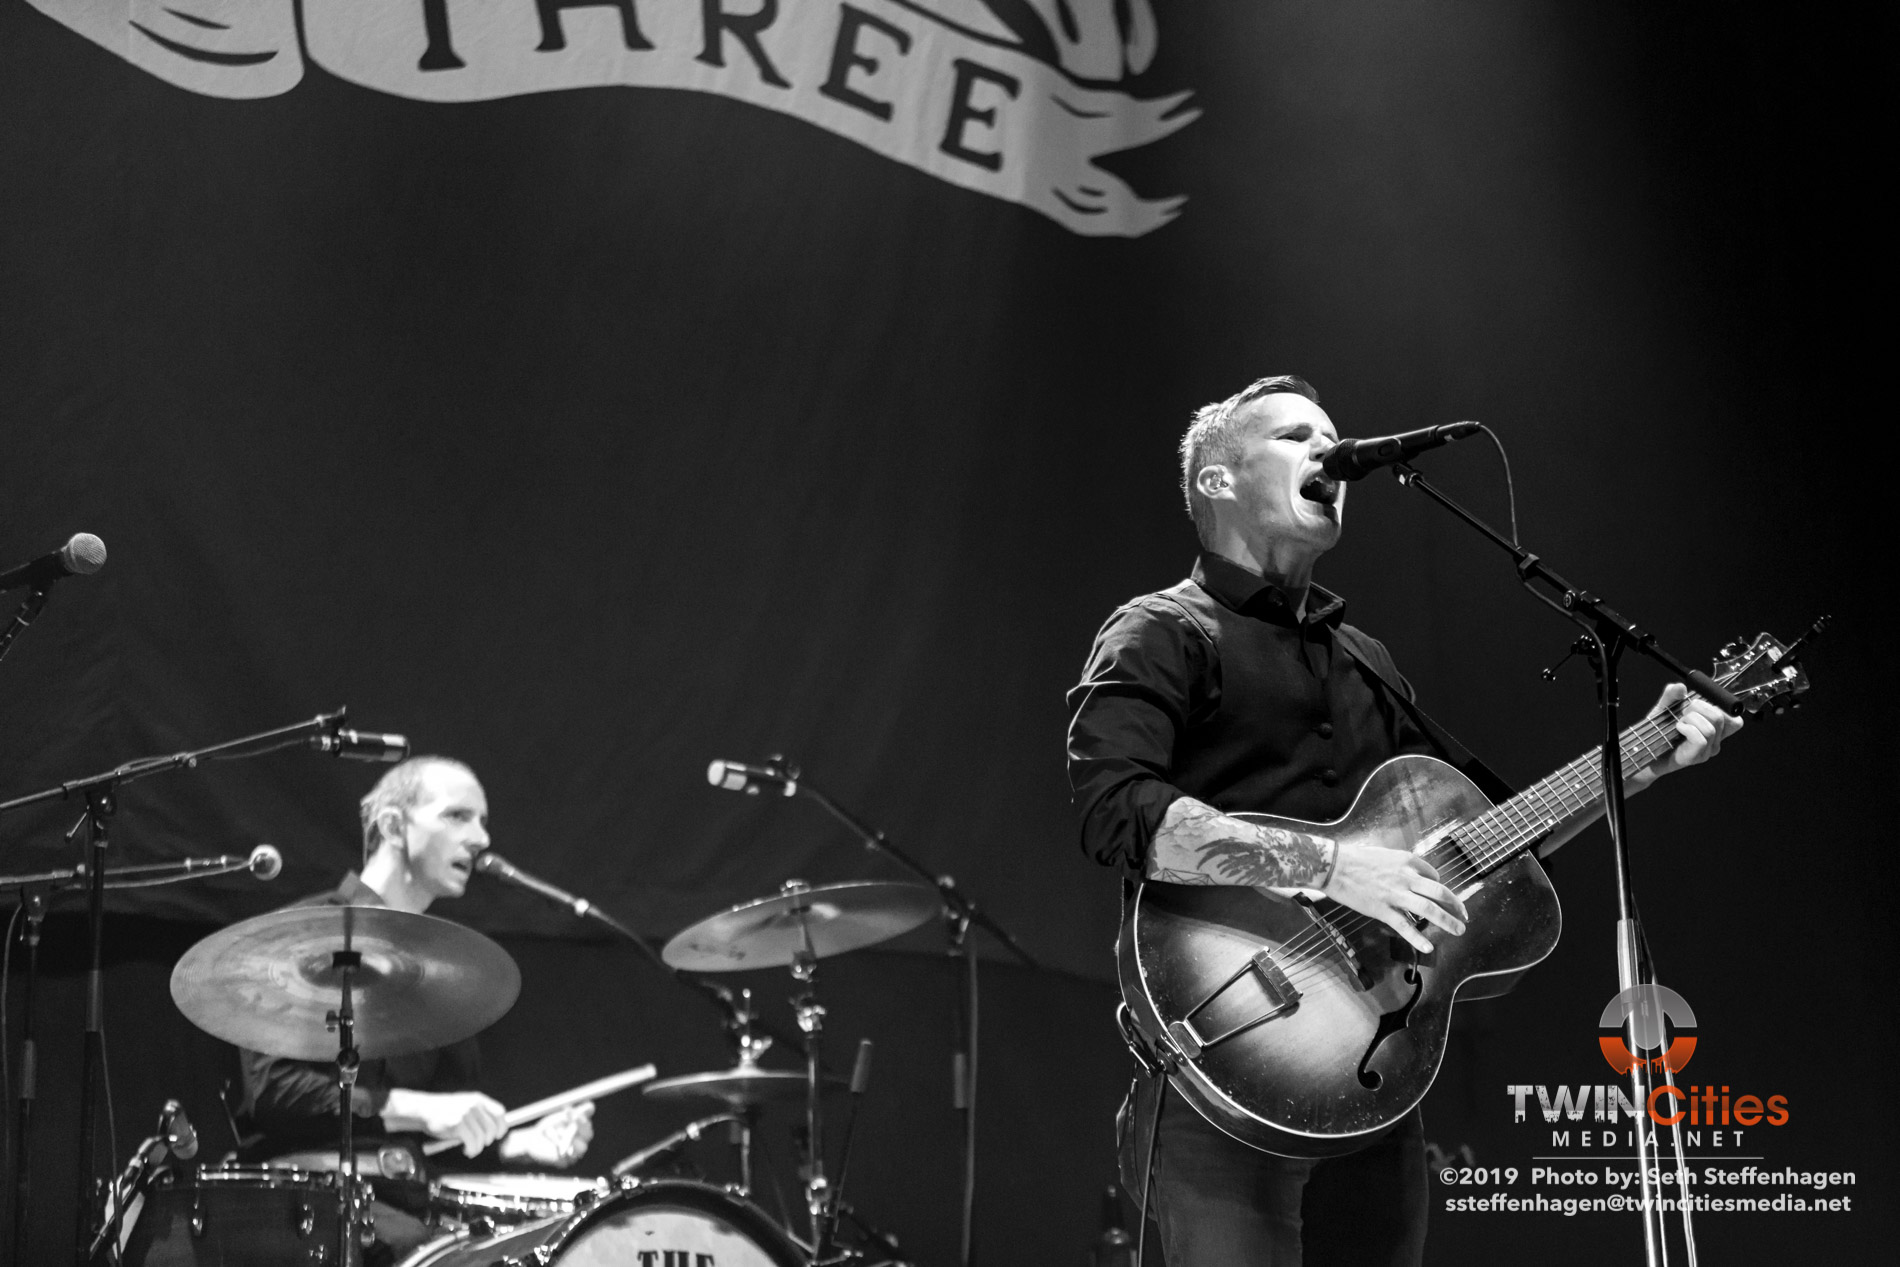 September 8, 2019 - Minneapolis, Minnesota, United States -  The Devil Makes Three live in concert at the The Armory opening for co-headliners Social Distortion and Flogging Molly.

(Photo by Seth Steffenhagen/Steffenhagen Photography)